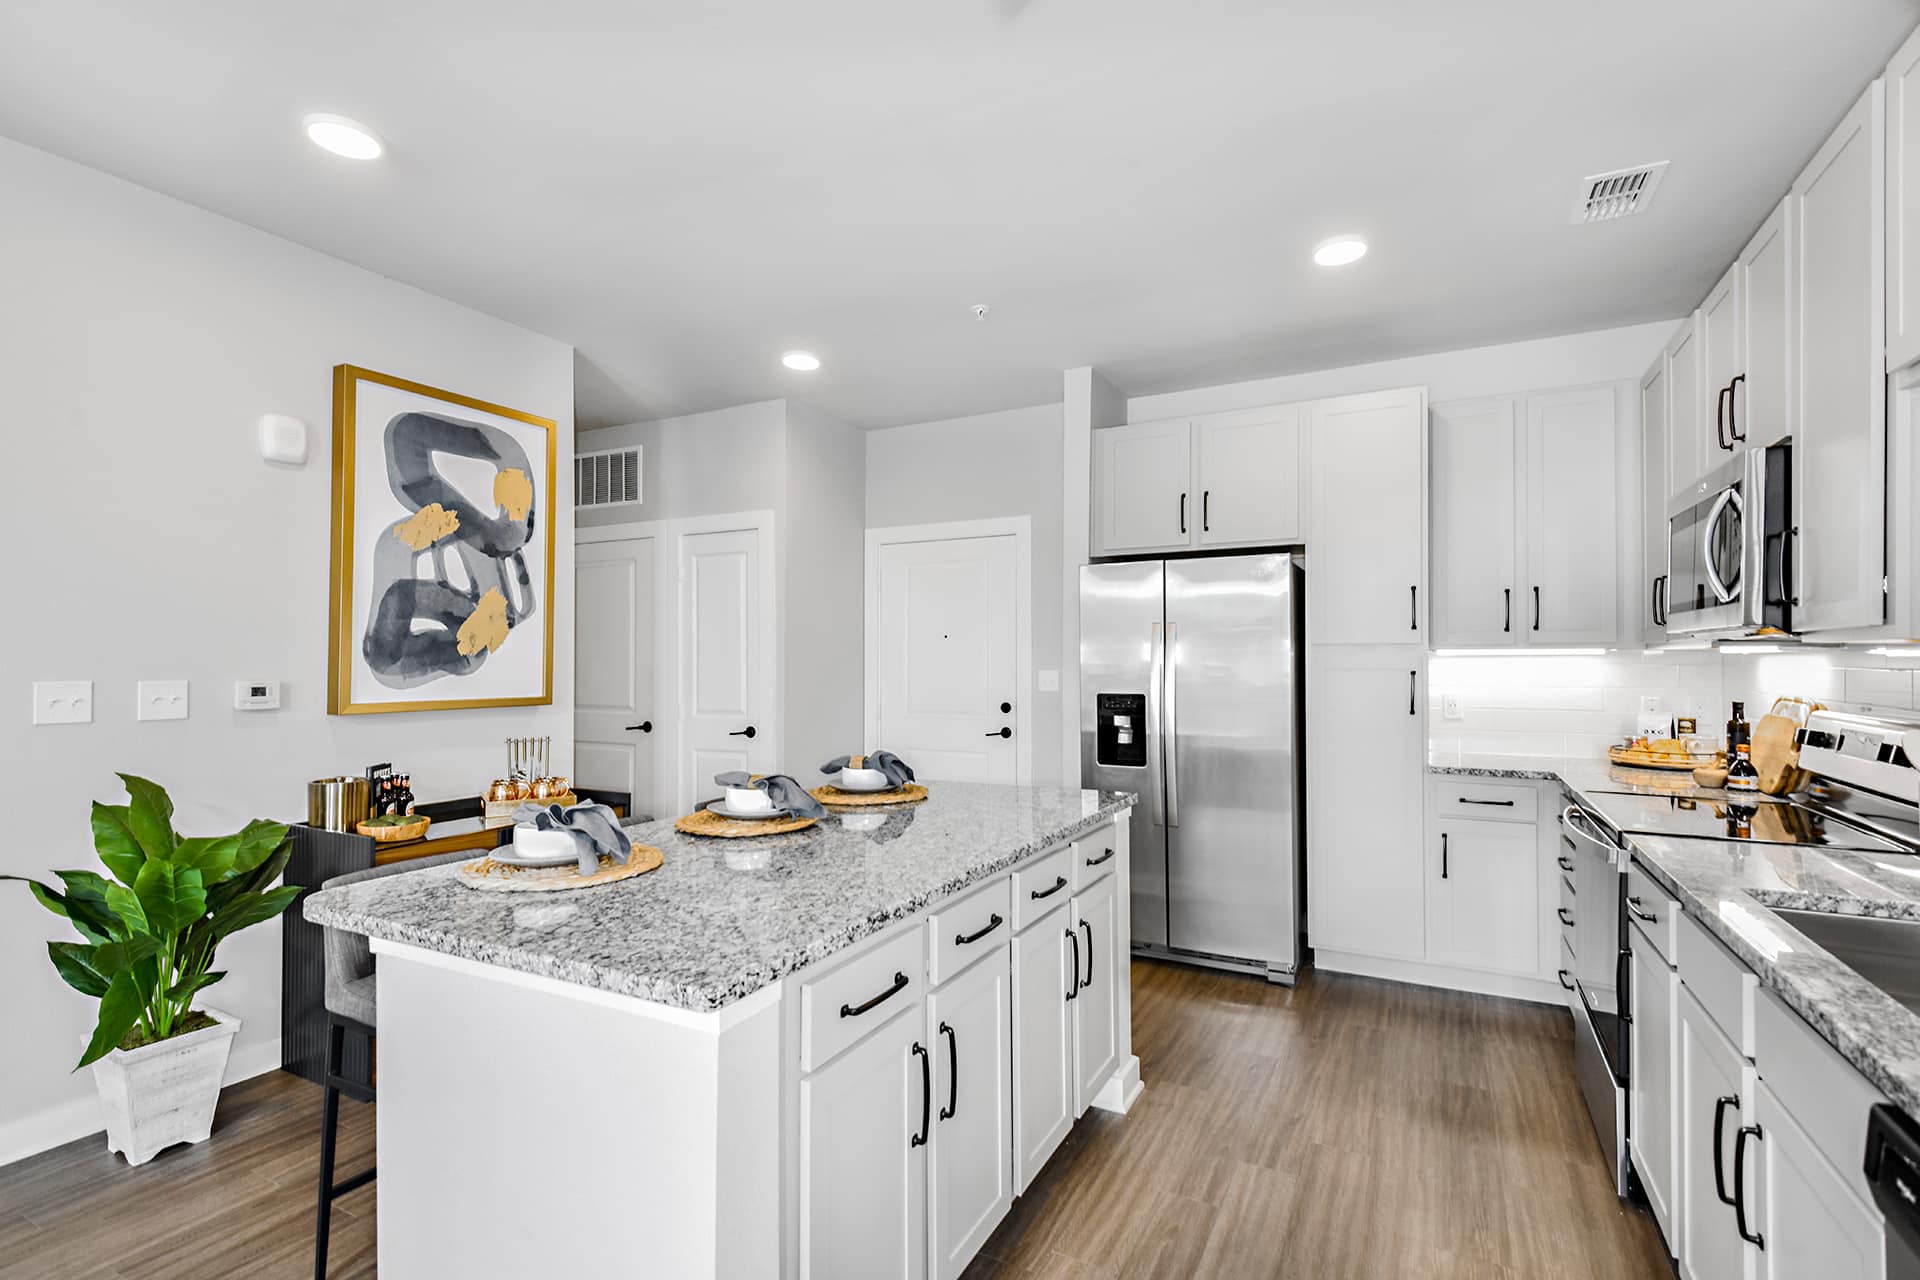 A kitchen with white cabinets, granite counter tops and stainless steel appliances.